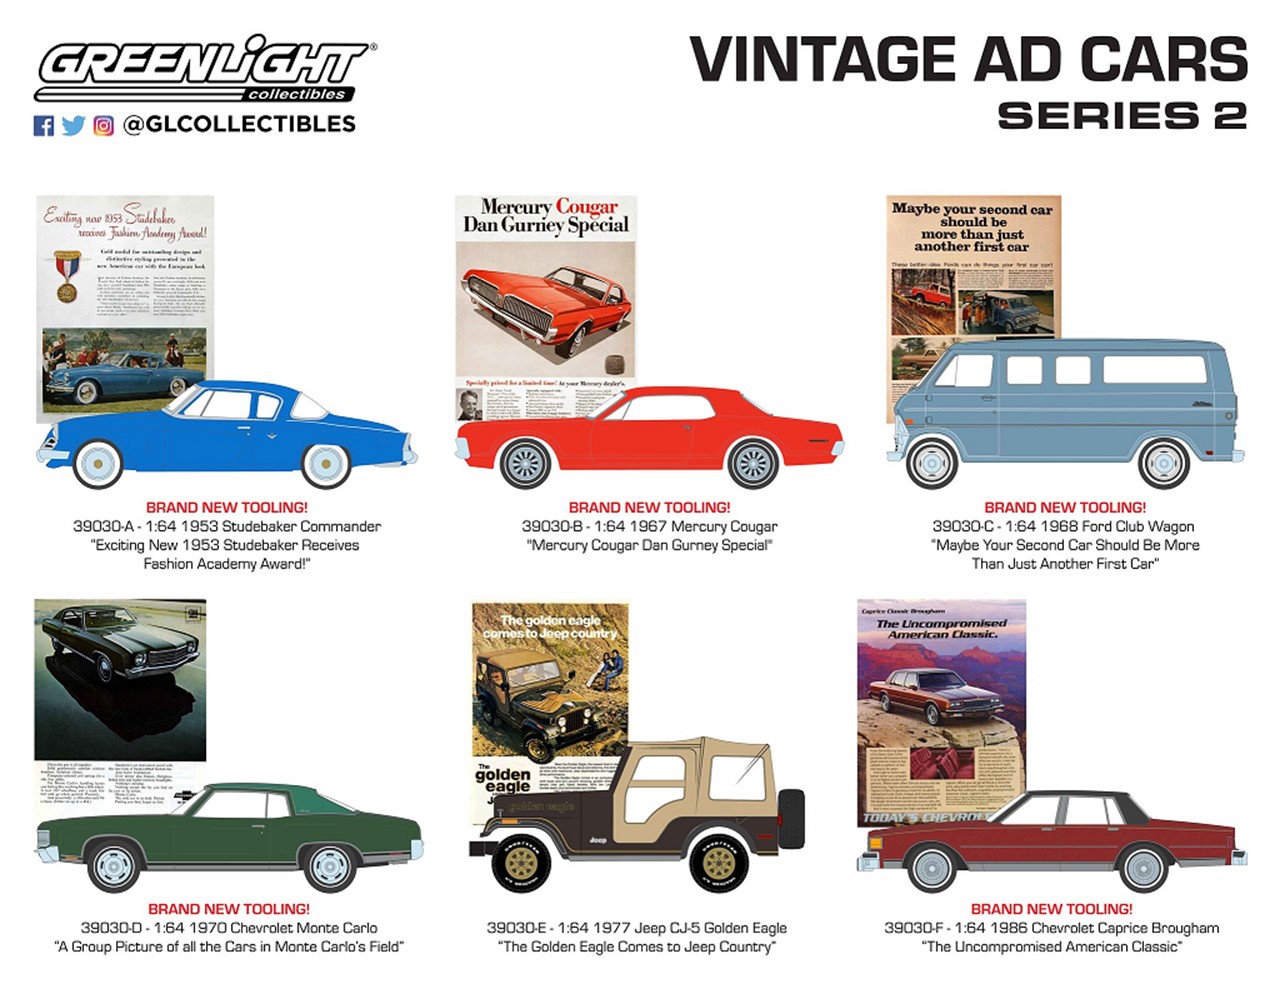 Greenlight 1968 Ford Club Wagon Vintage AD Cars Series 2 1/64 for sale online 